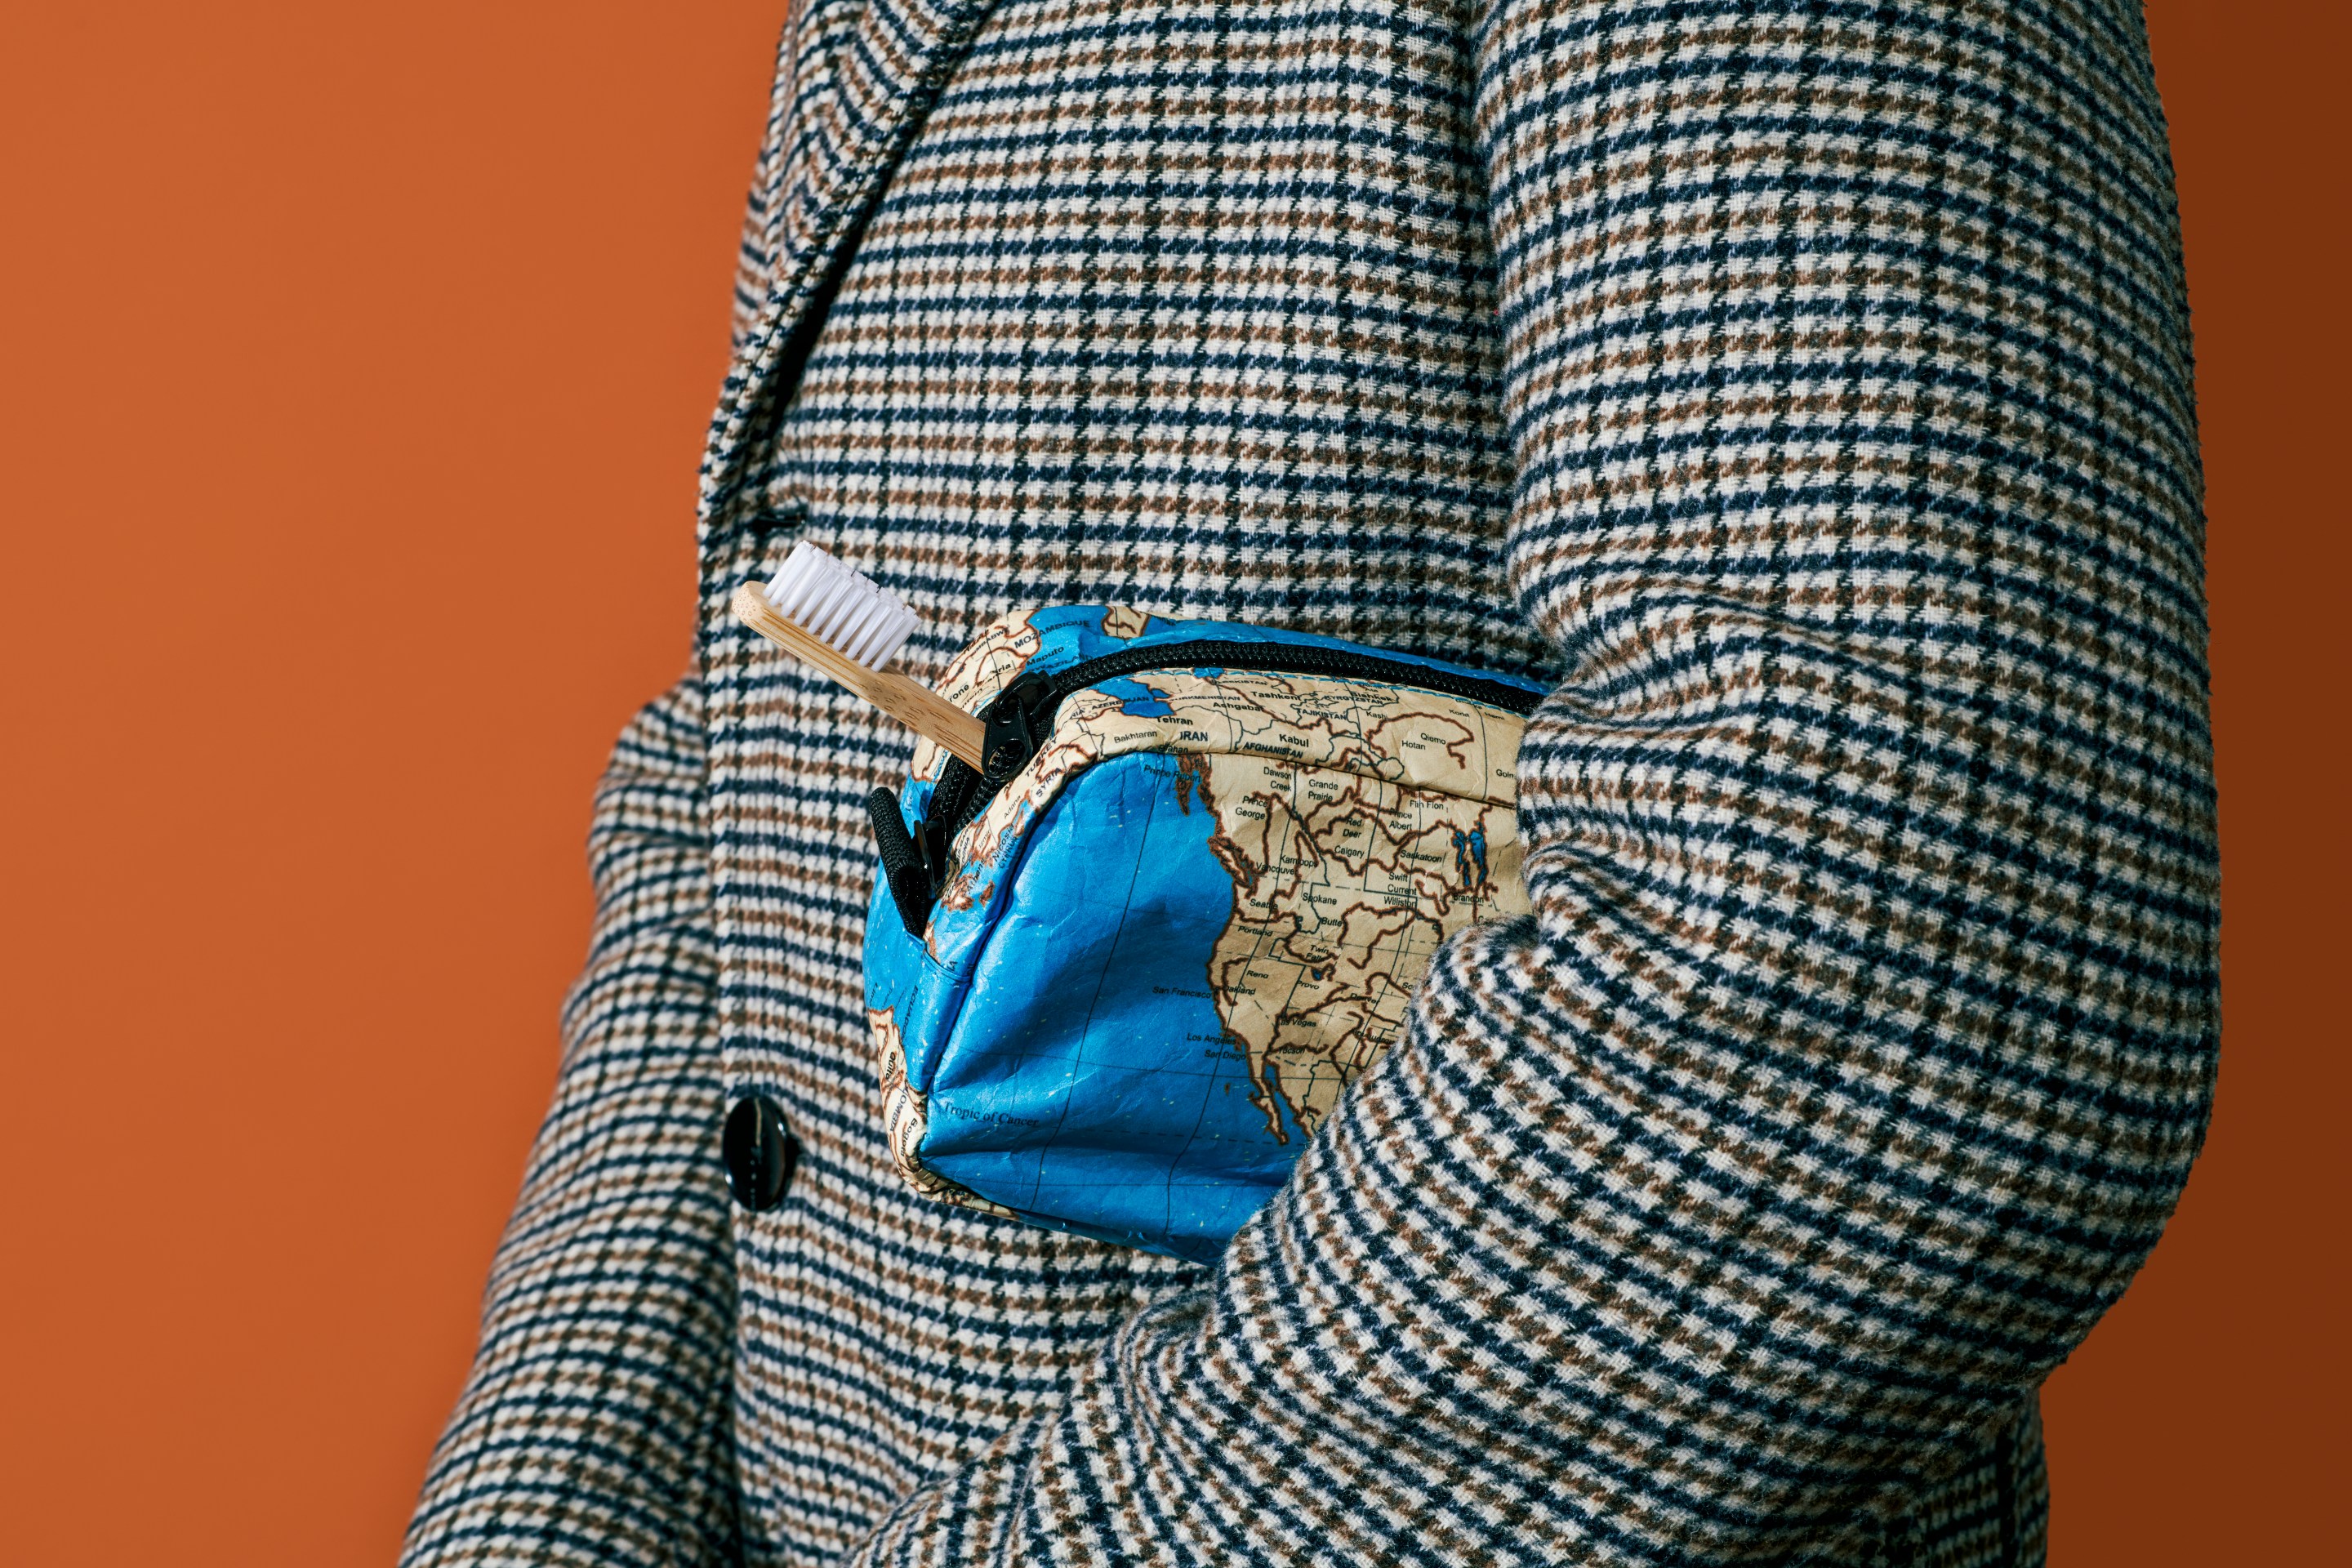 A person in a checkered blazer holding a world map-patterned toiletry bag with a toothbrush sticking out of it underneath their arm.